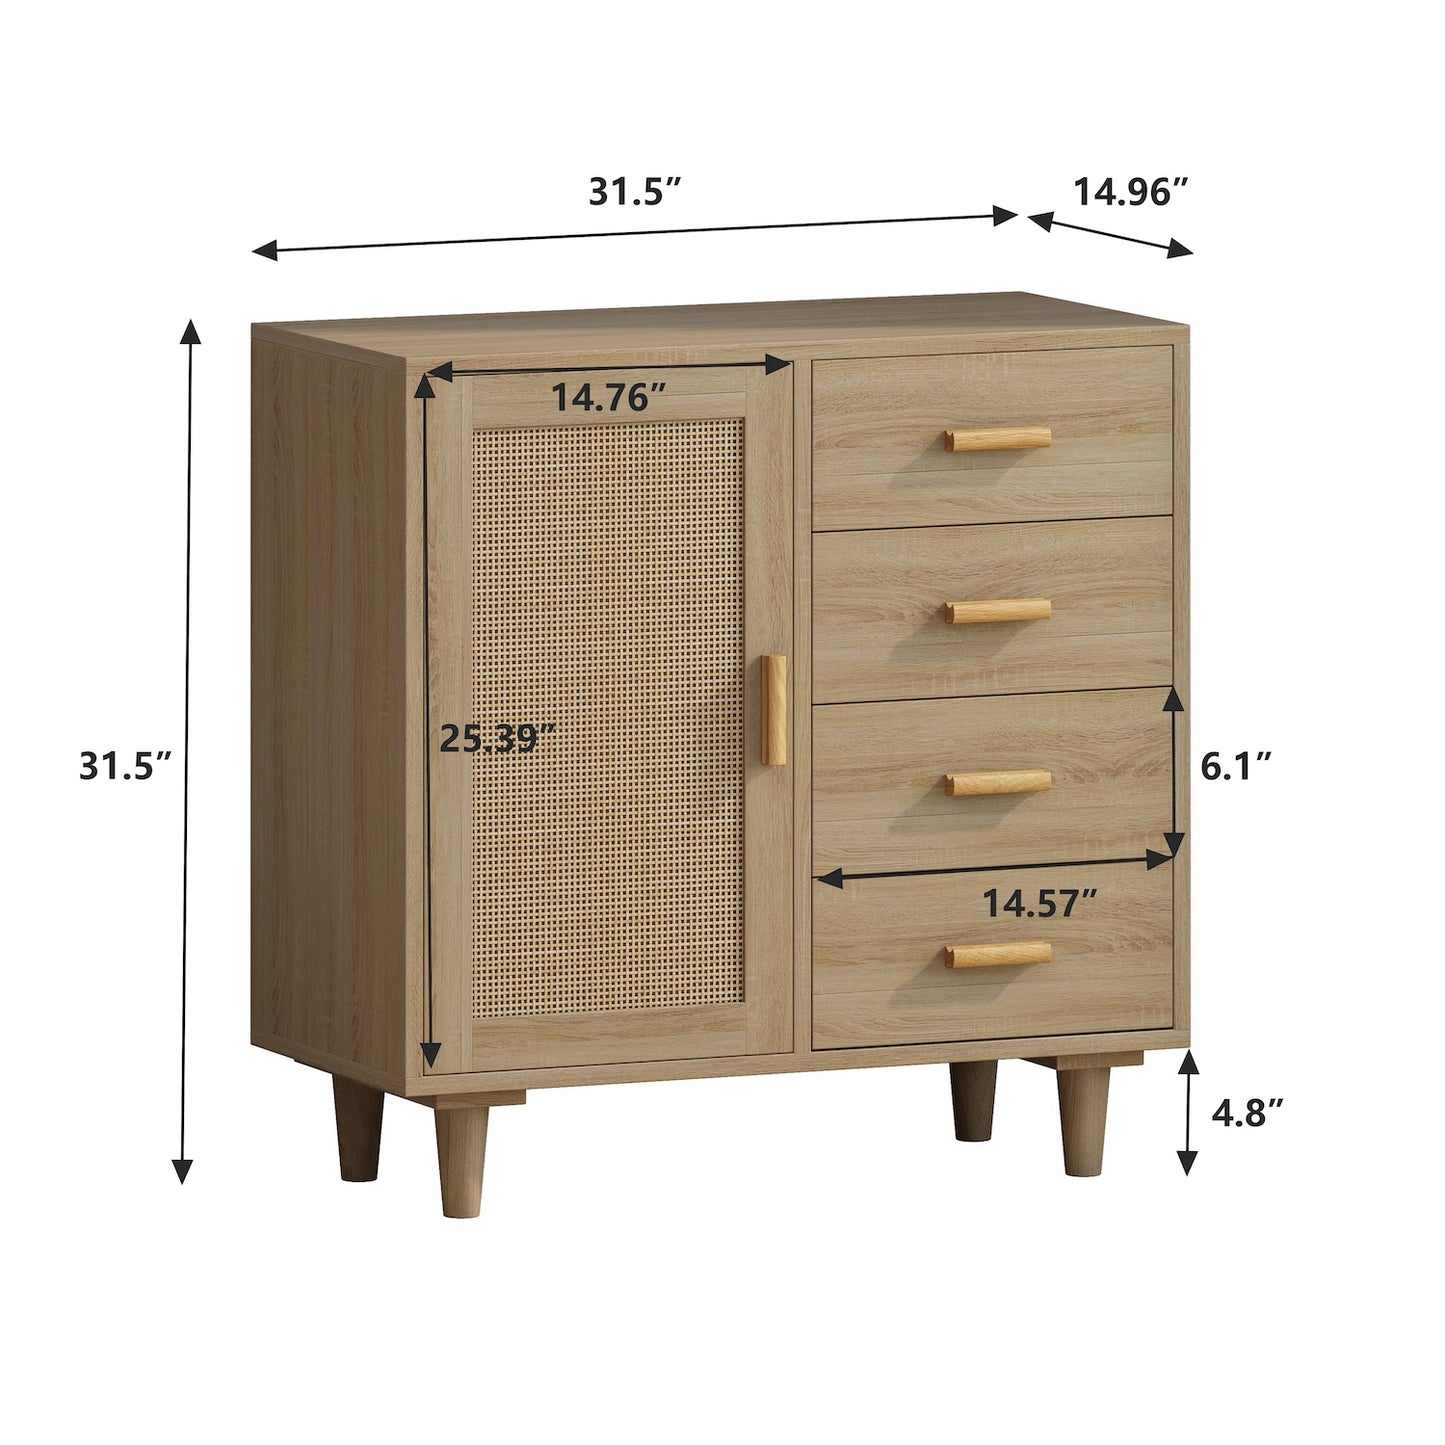 Danita 4-Drawer Cabinet in Natural Finish with Rattan Drawer Fronts